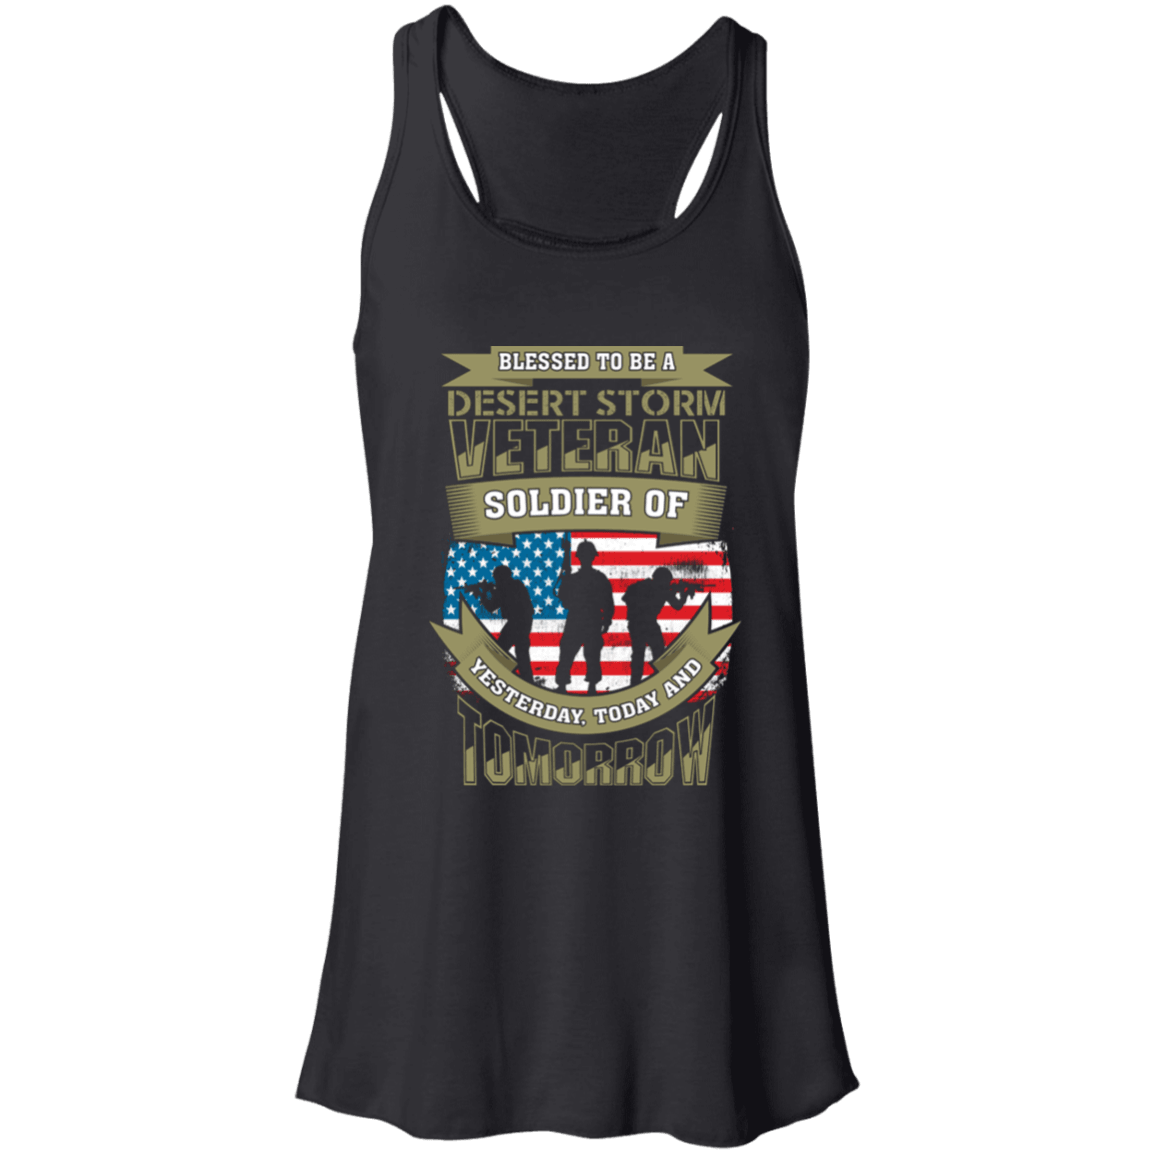 Designs by MyUtopia Shout Out:Blessed to be a Desert Storm Veteran Soldier of Yesterday Today and Tomorrow Flowy Racerback Tank,X-Small / Black,Tank Tops